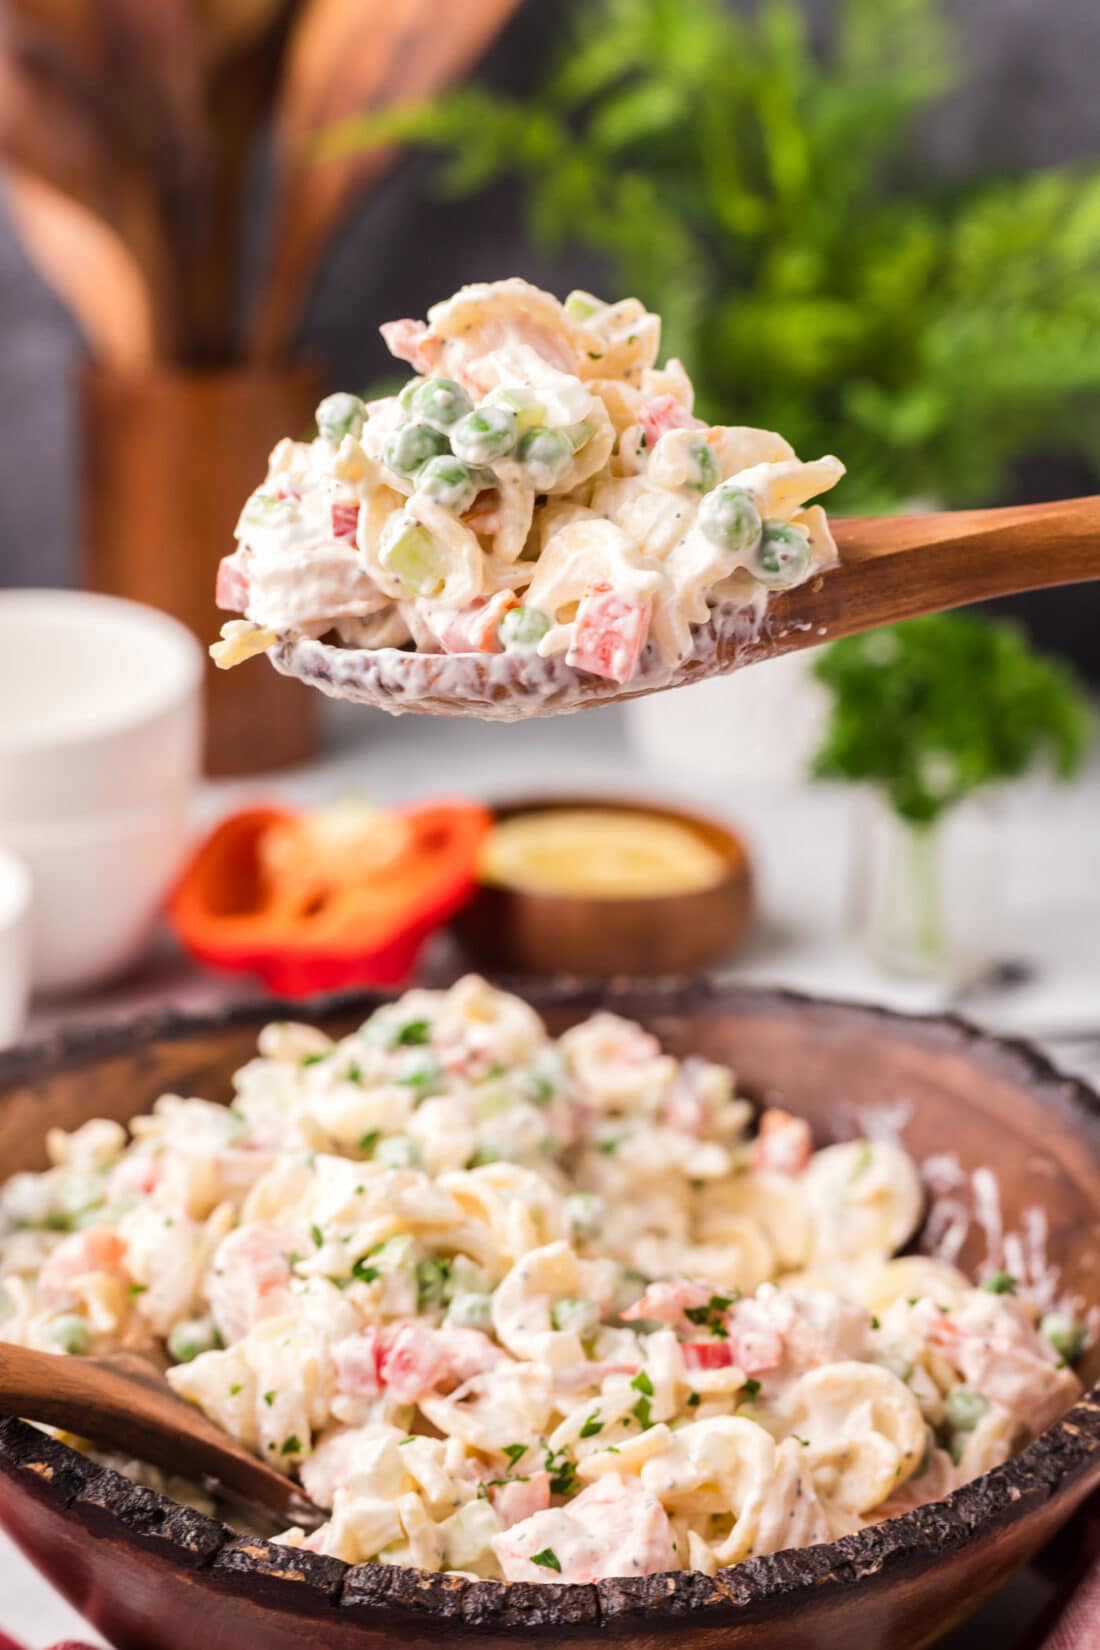 Spoonful of Shrimp Pasta Salad lifted above a bowl of Shrimp Pasta Salad